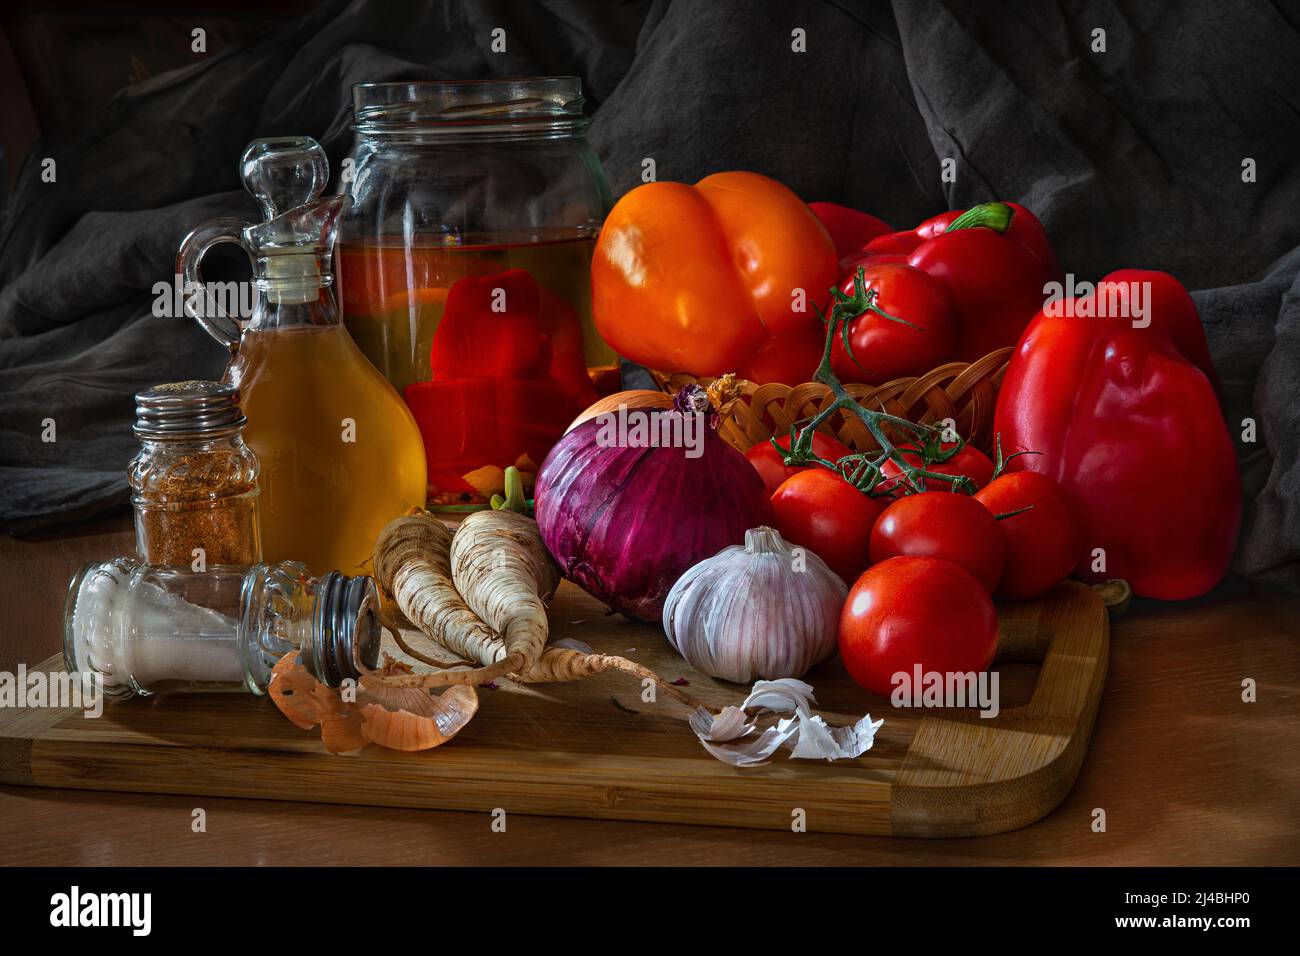 Dark and atmospheric still life photo, vegetables, red pepper, yellow pepper, olive oil, parsley root, salt shaker, spices, made using natural light. Stock Photo